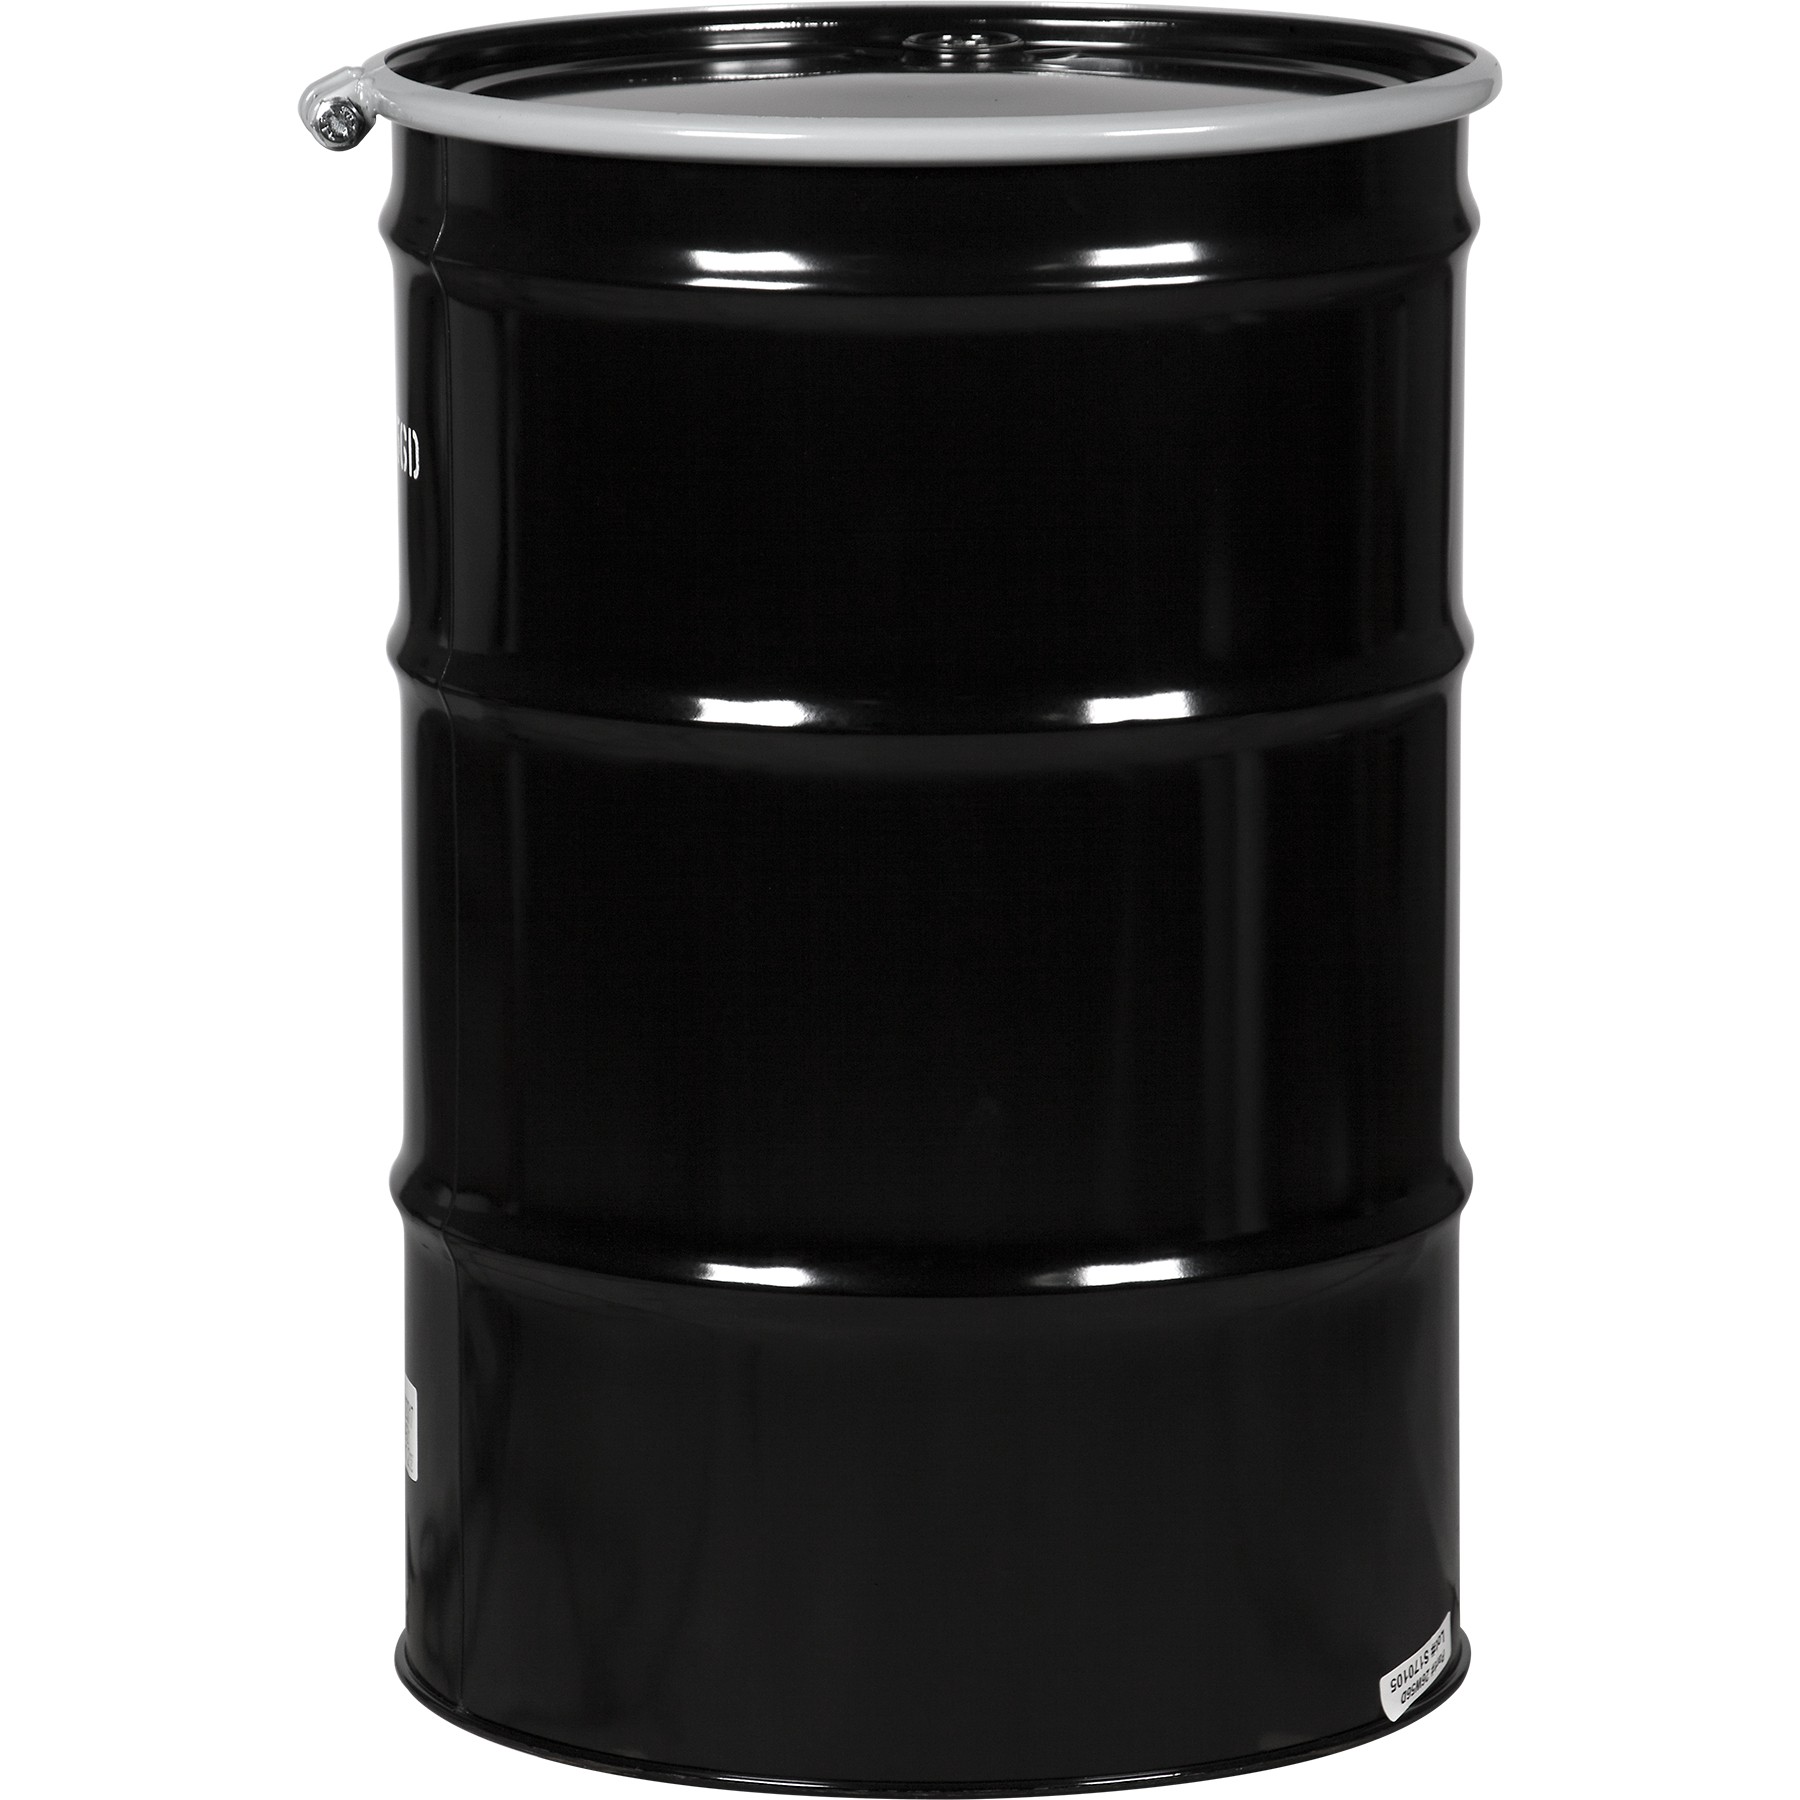 55 Gallon Steel Drum, UN Rated, 2